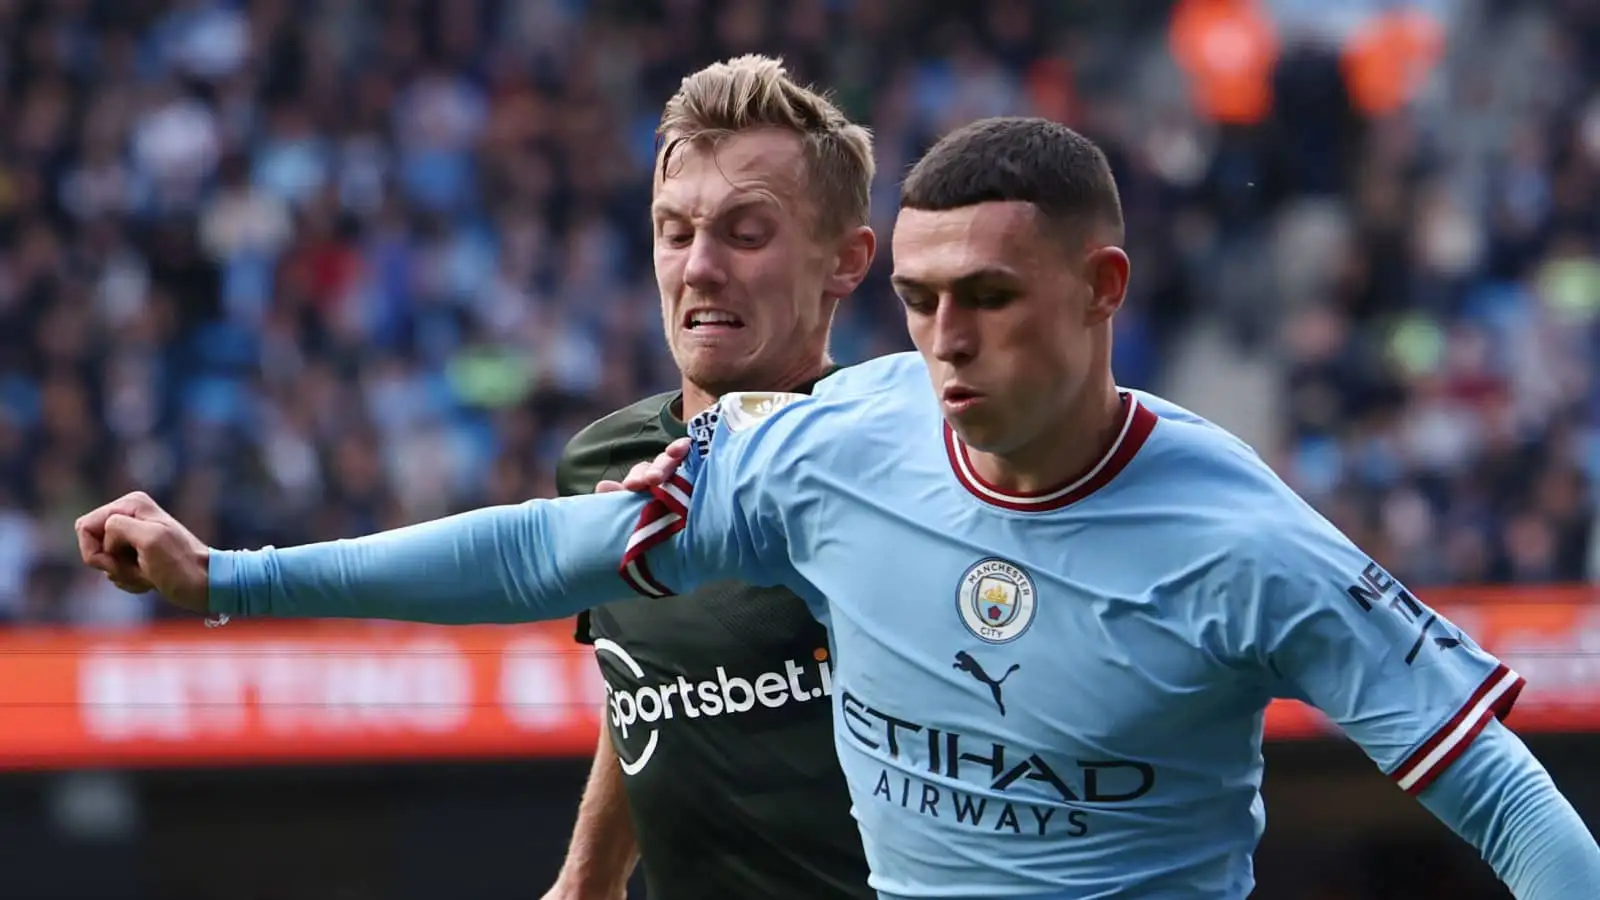 Southampton midfielder James Ward-Prowse and Man City attacker Phil Foden